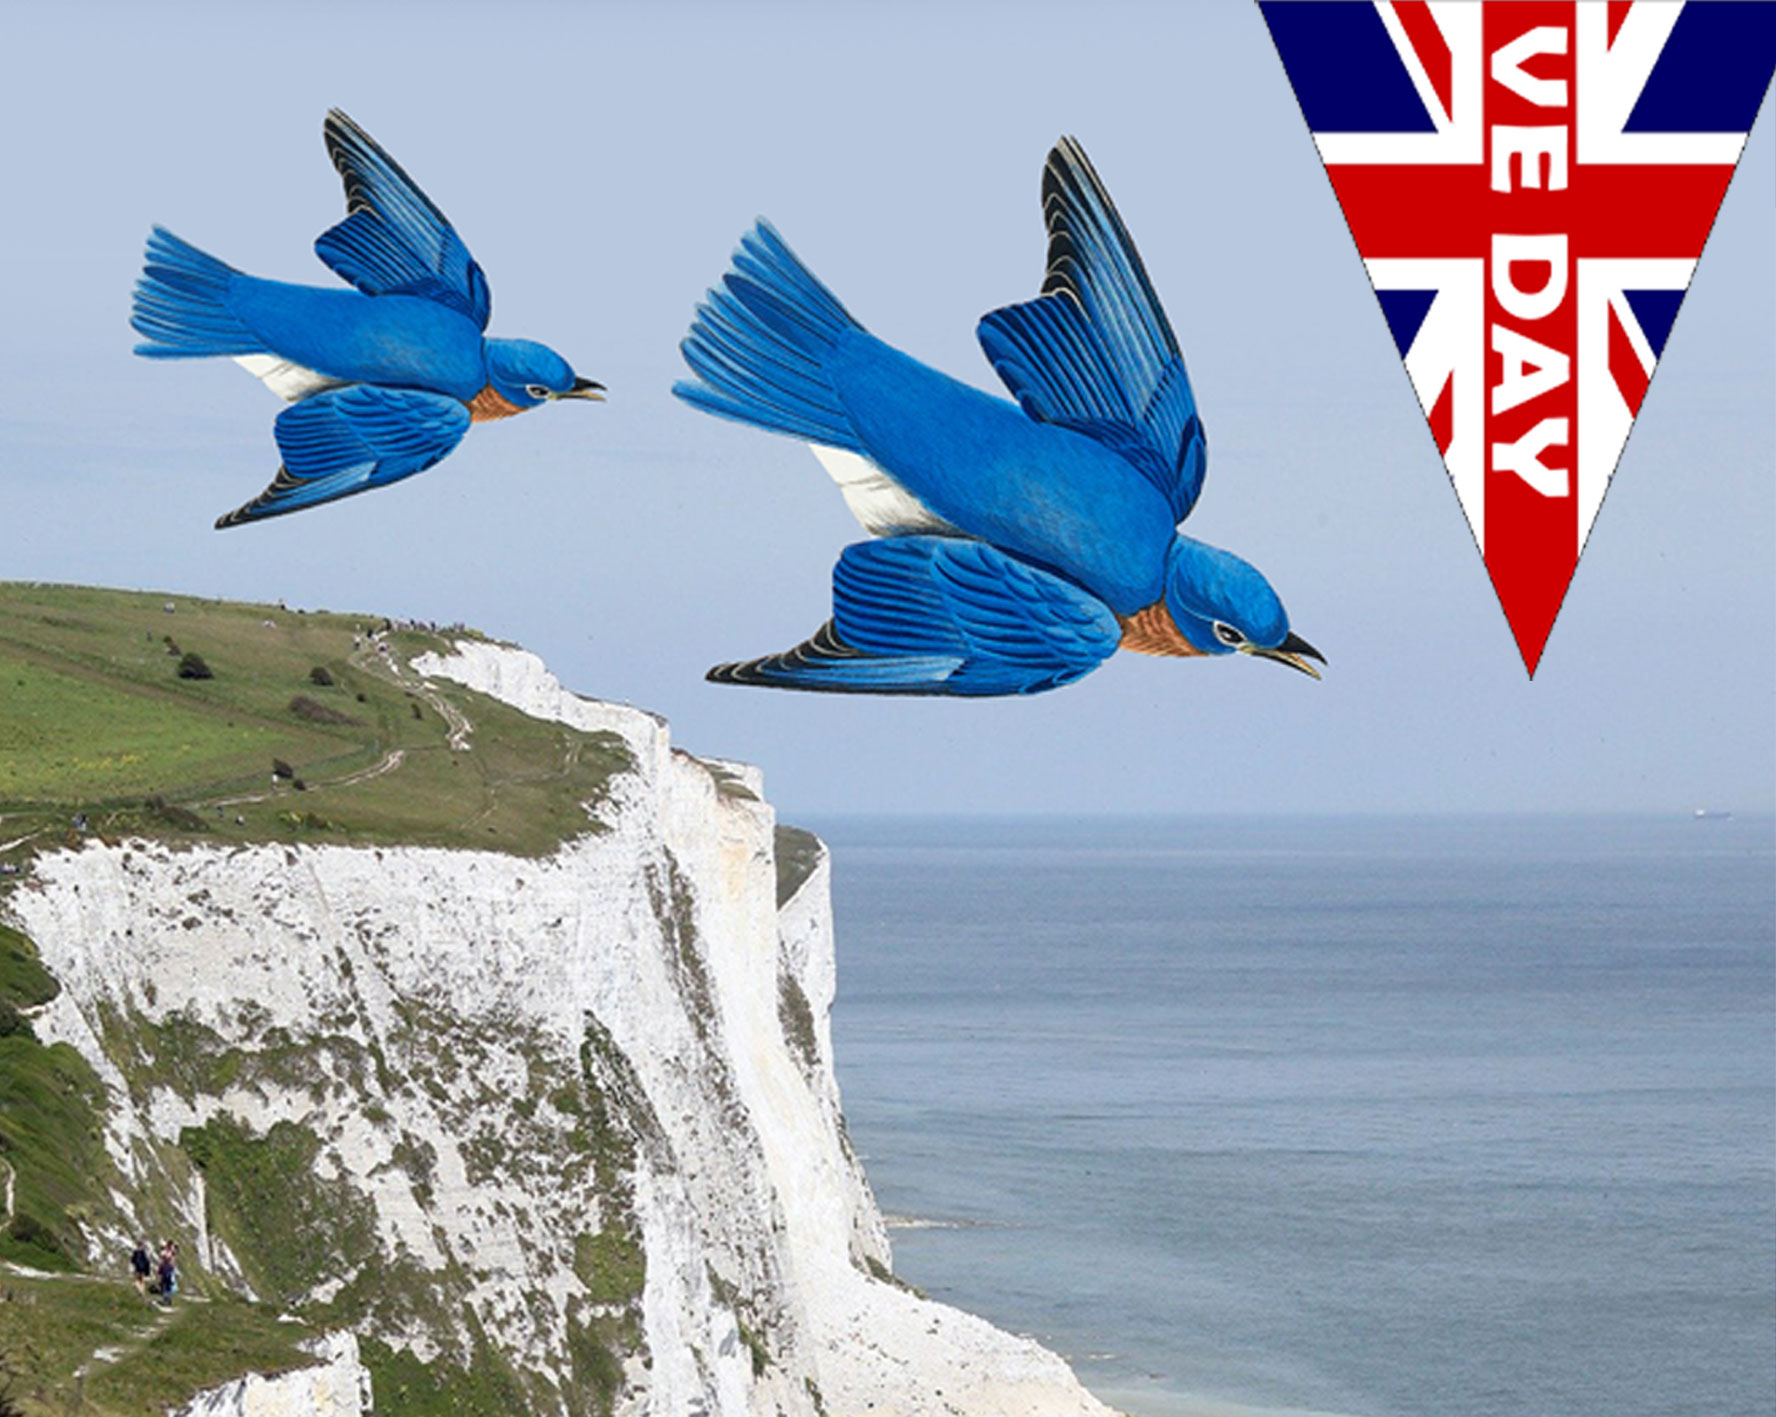 VE Day poster inspired by Vera Lynn's rendition of the famous song The White Cliffs of Dover